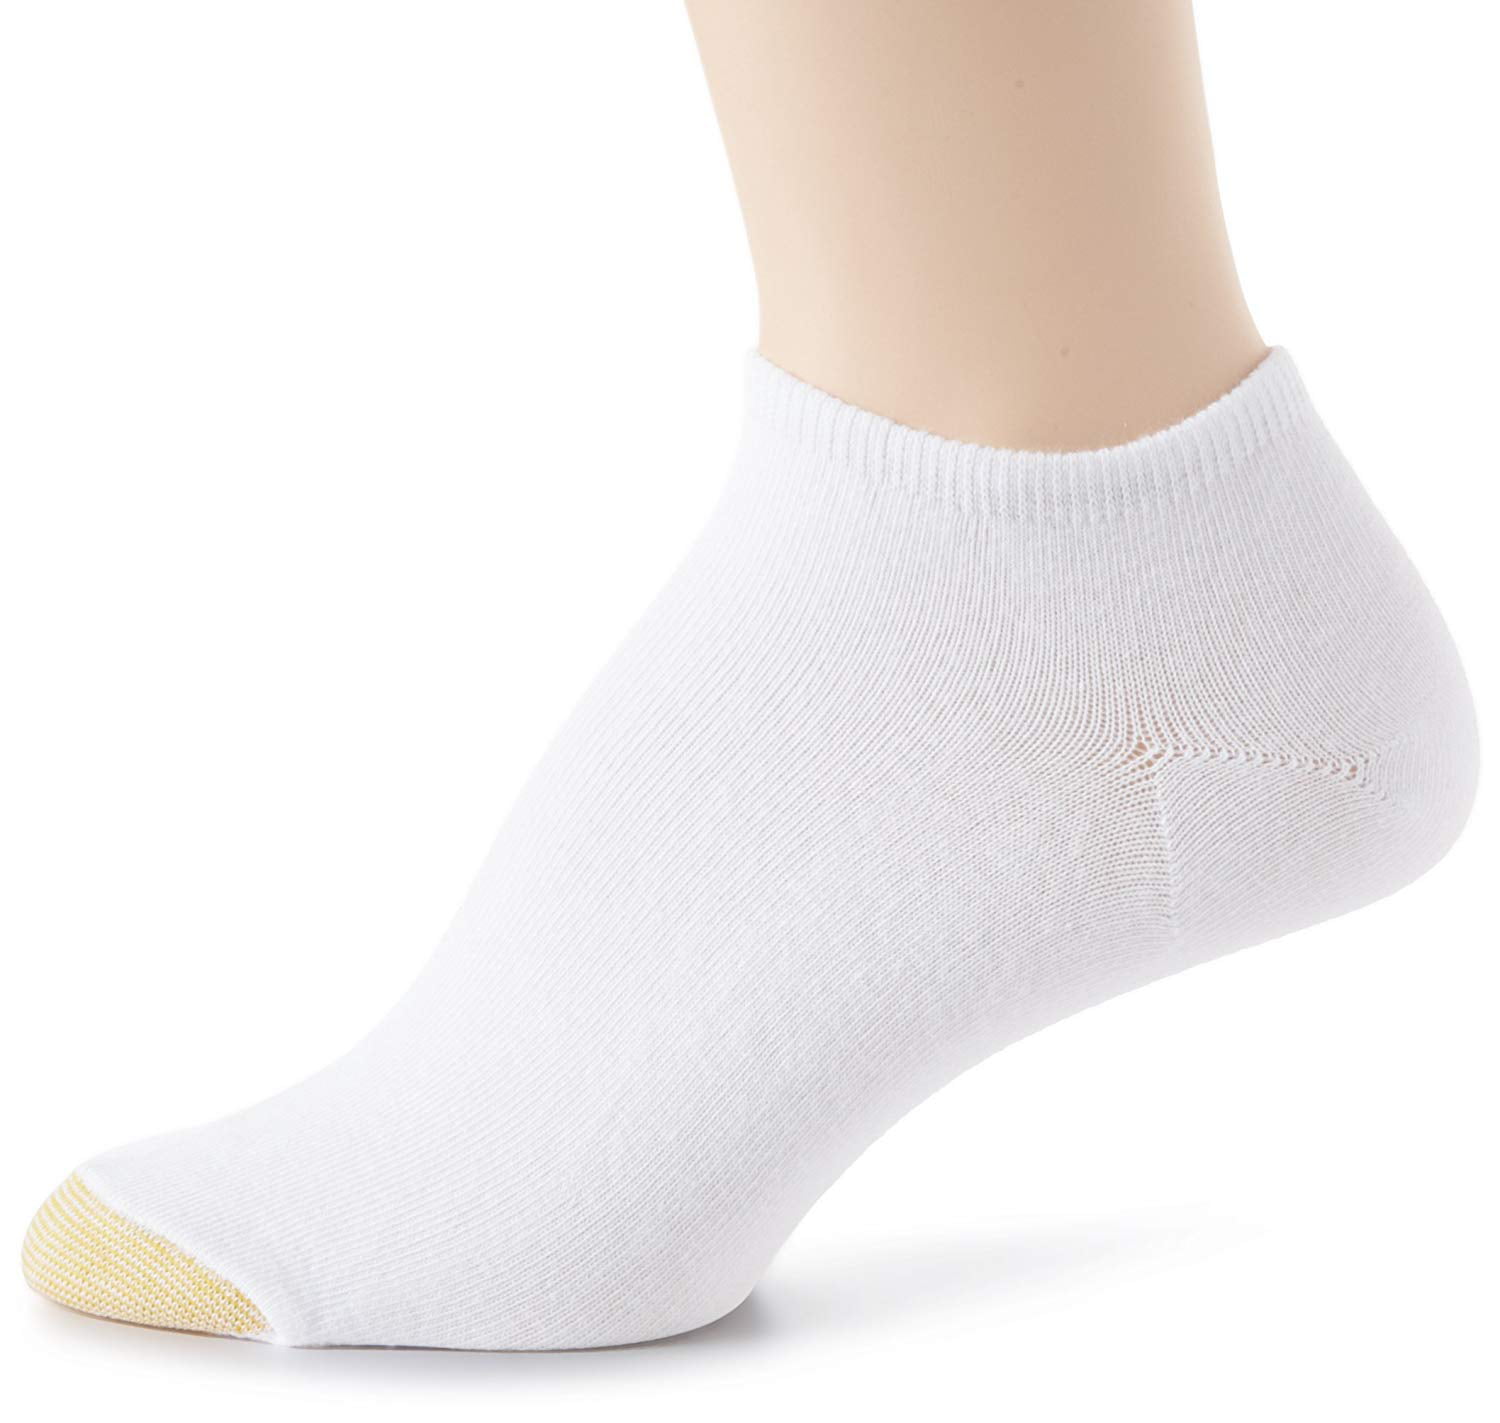 GOLDTOE - Gold Toe Women's 6 Pack Plus Size Jersey Liner,White,10-12 ...